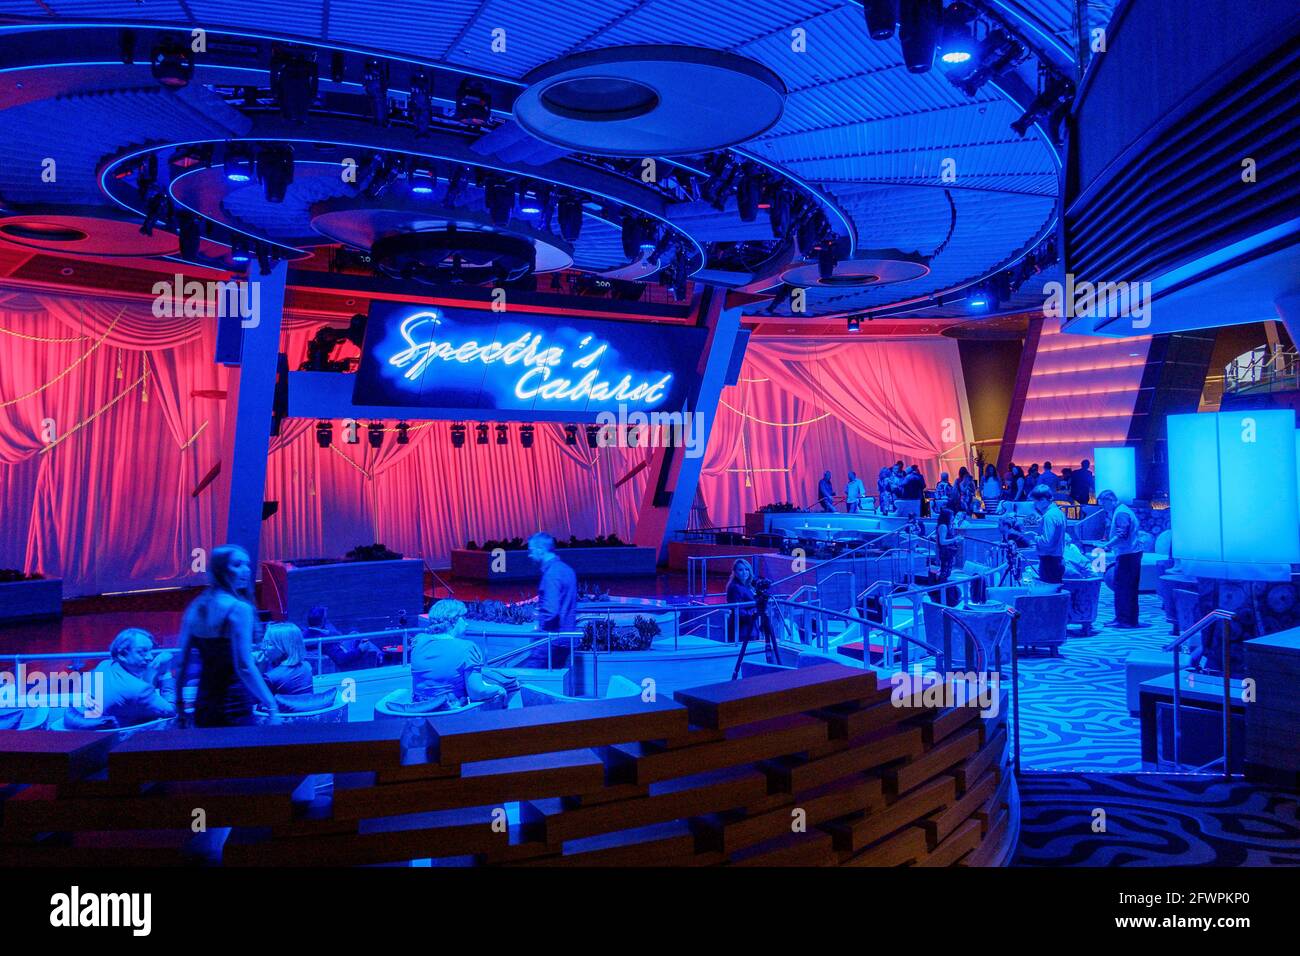 Spectra's Cabaret on board the cruise liner Royal Caribbeans Anthem of the Seas. Stock Photo